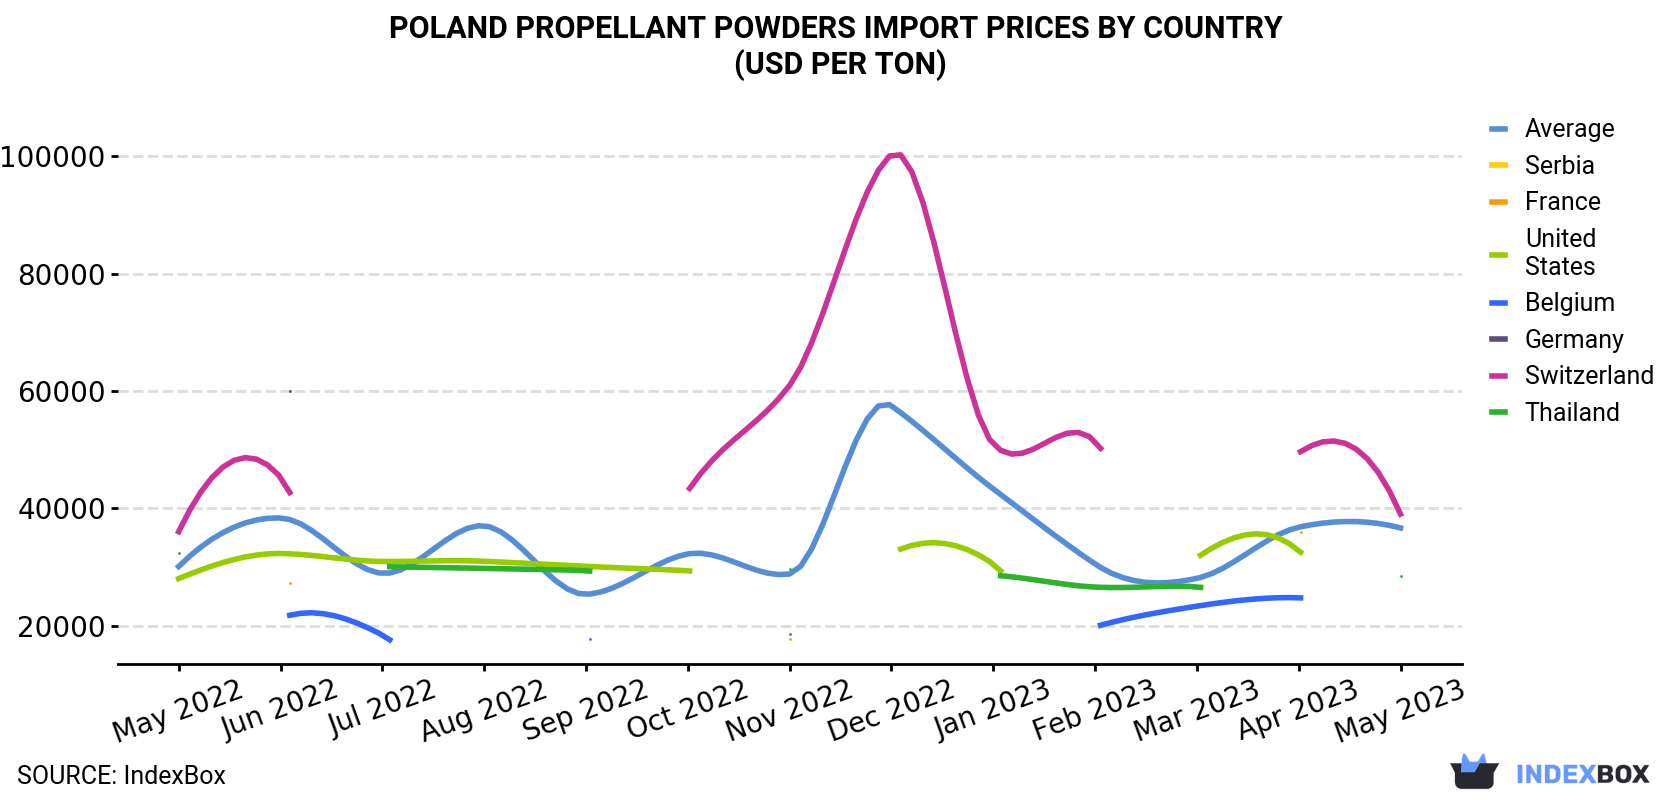 Poland Propellant Powders Import Prices By Country (USD Per Ton)